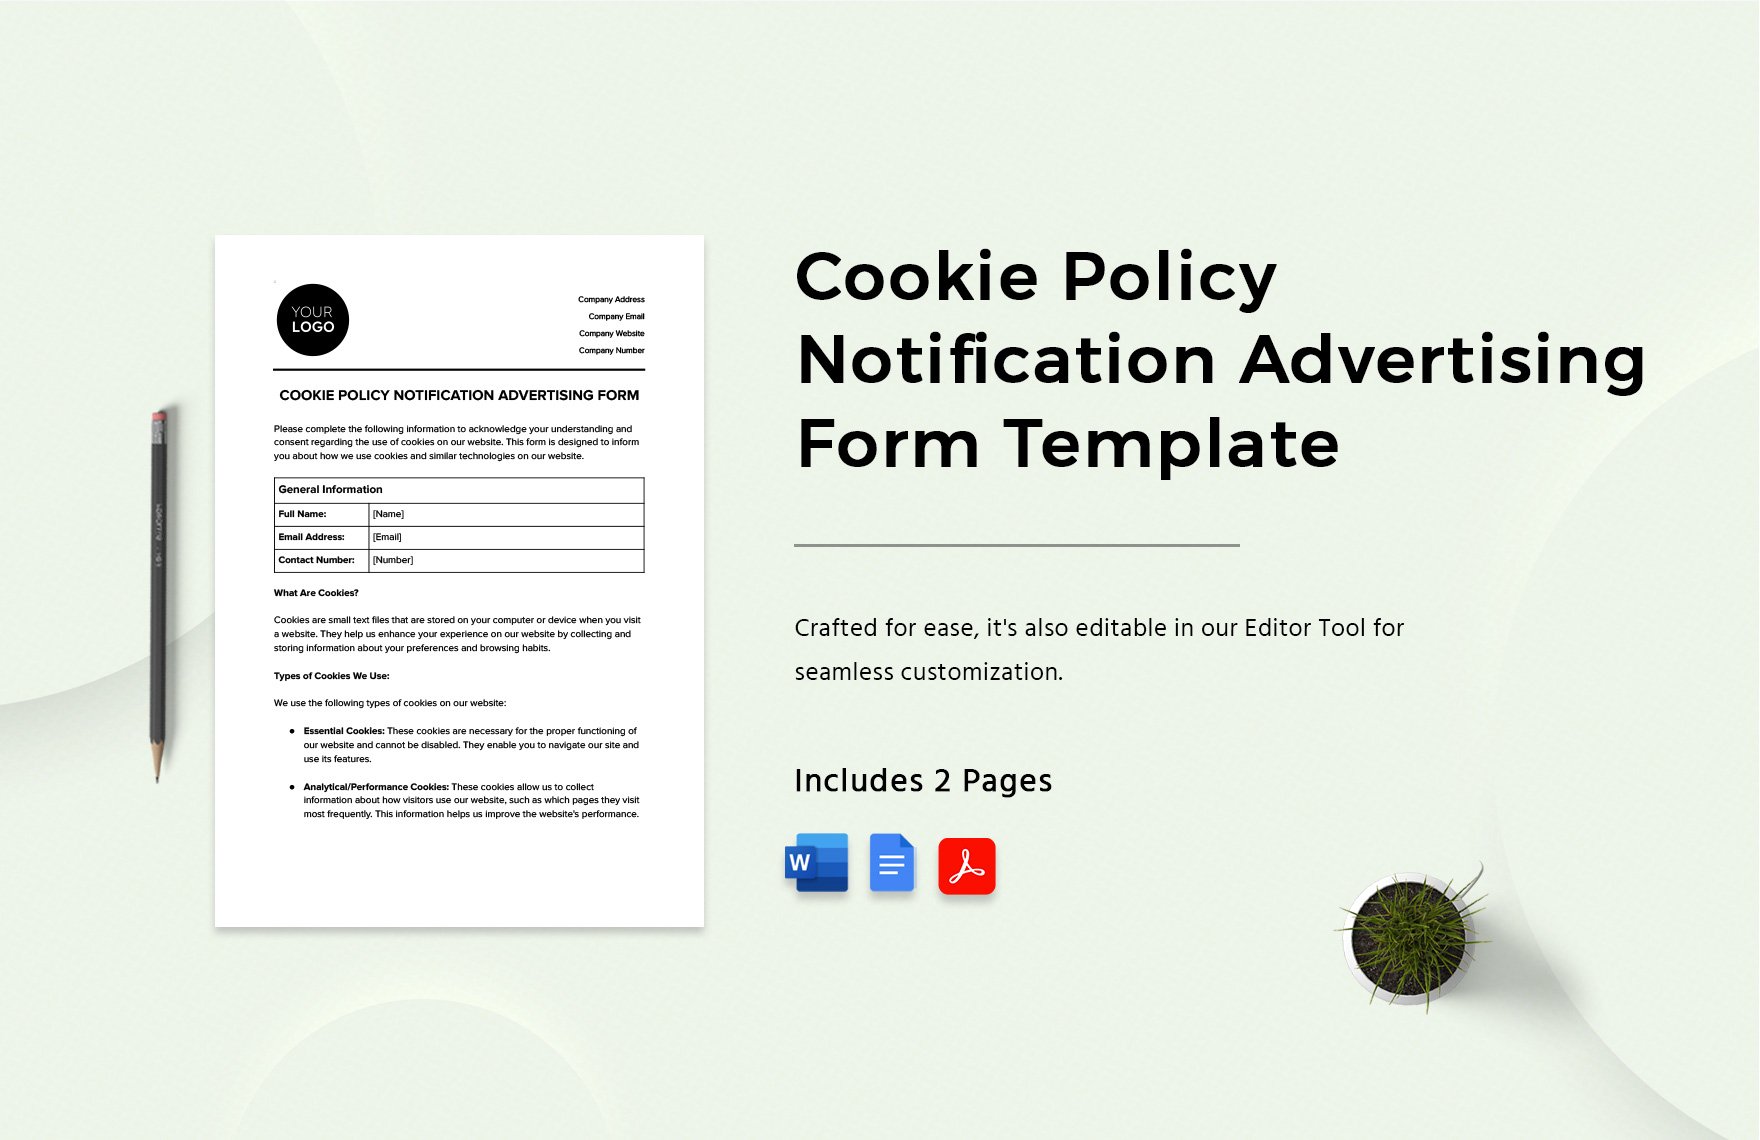 Cookie Policy Notification Advertising Form Template in Word, Google Docs, PDF